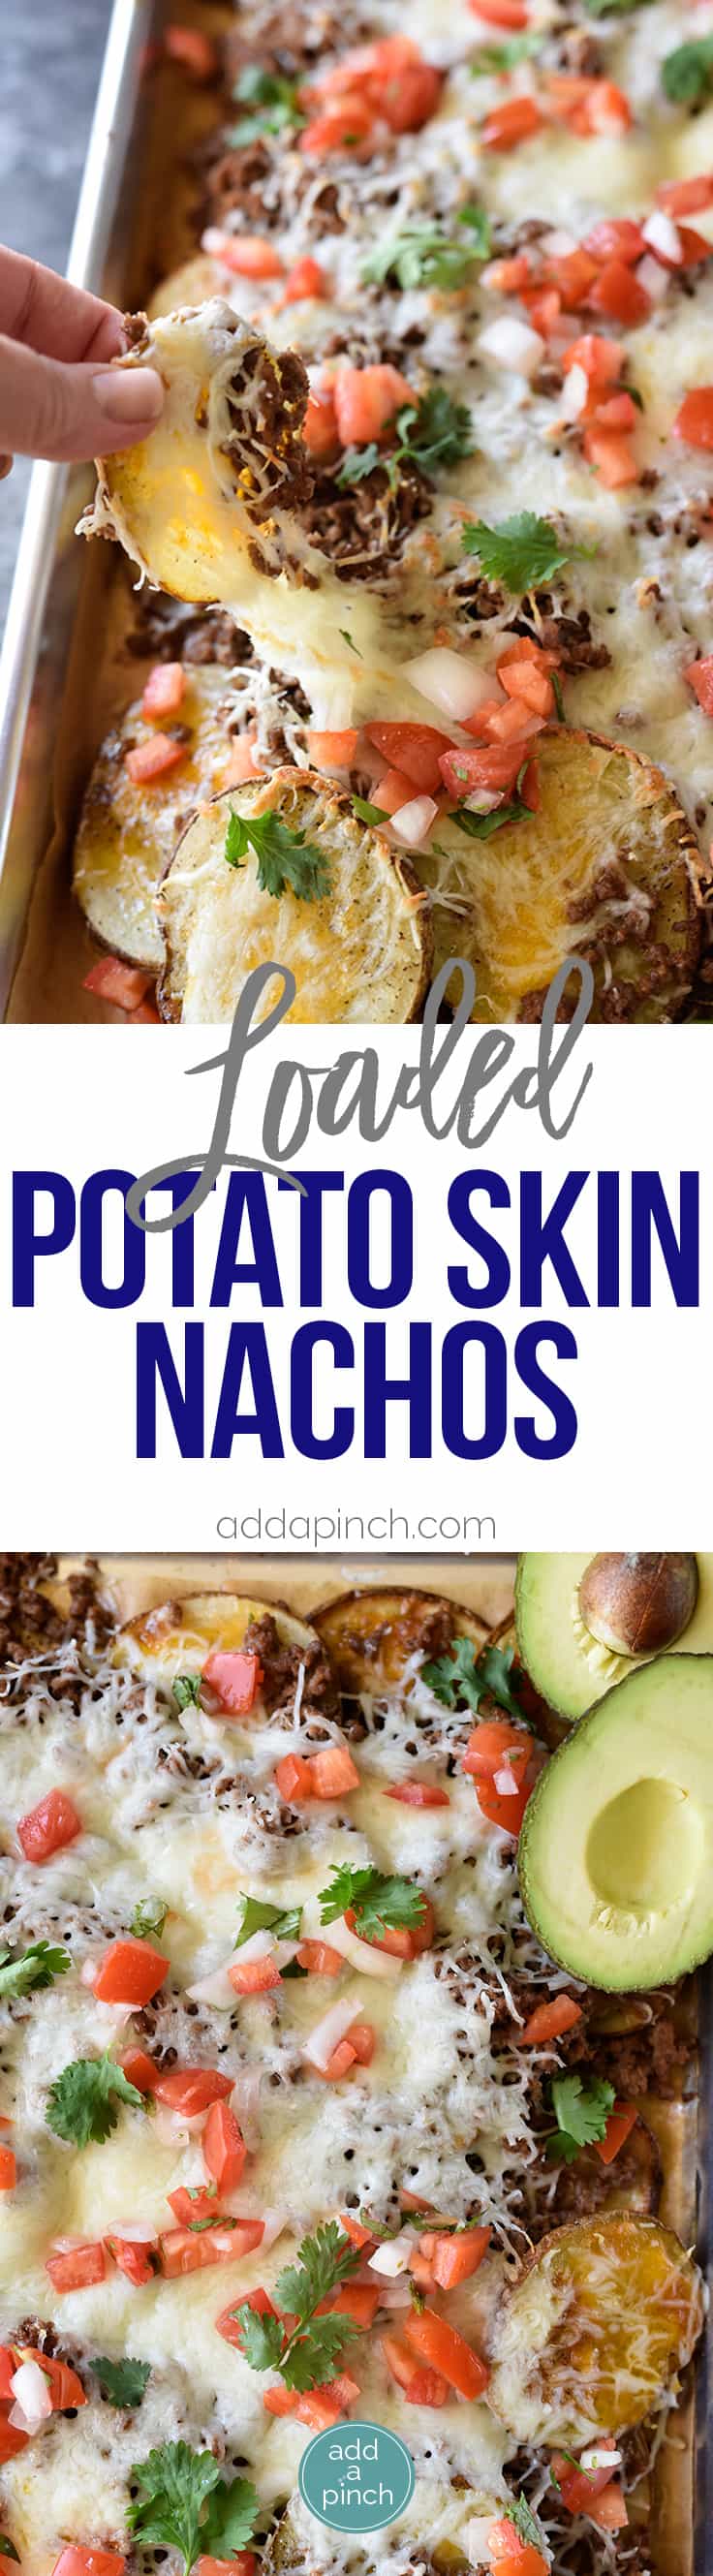 Loaded Potato Skin Nachos Recipe - These nachos will quickly become a favorite with the blend of loaded potato skins and spicy nachos all in one! // addapinch.com